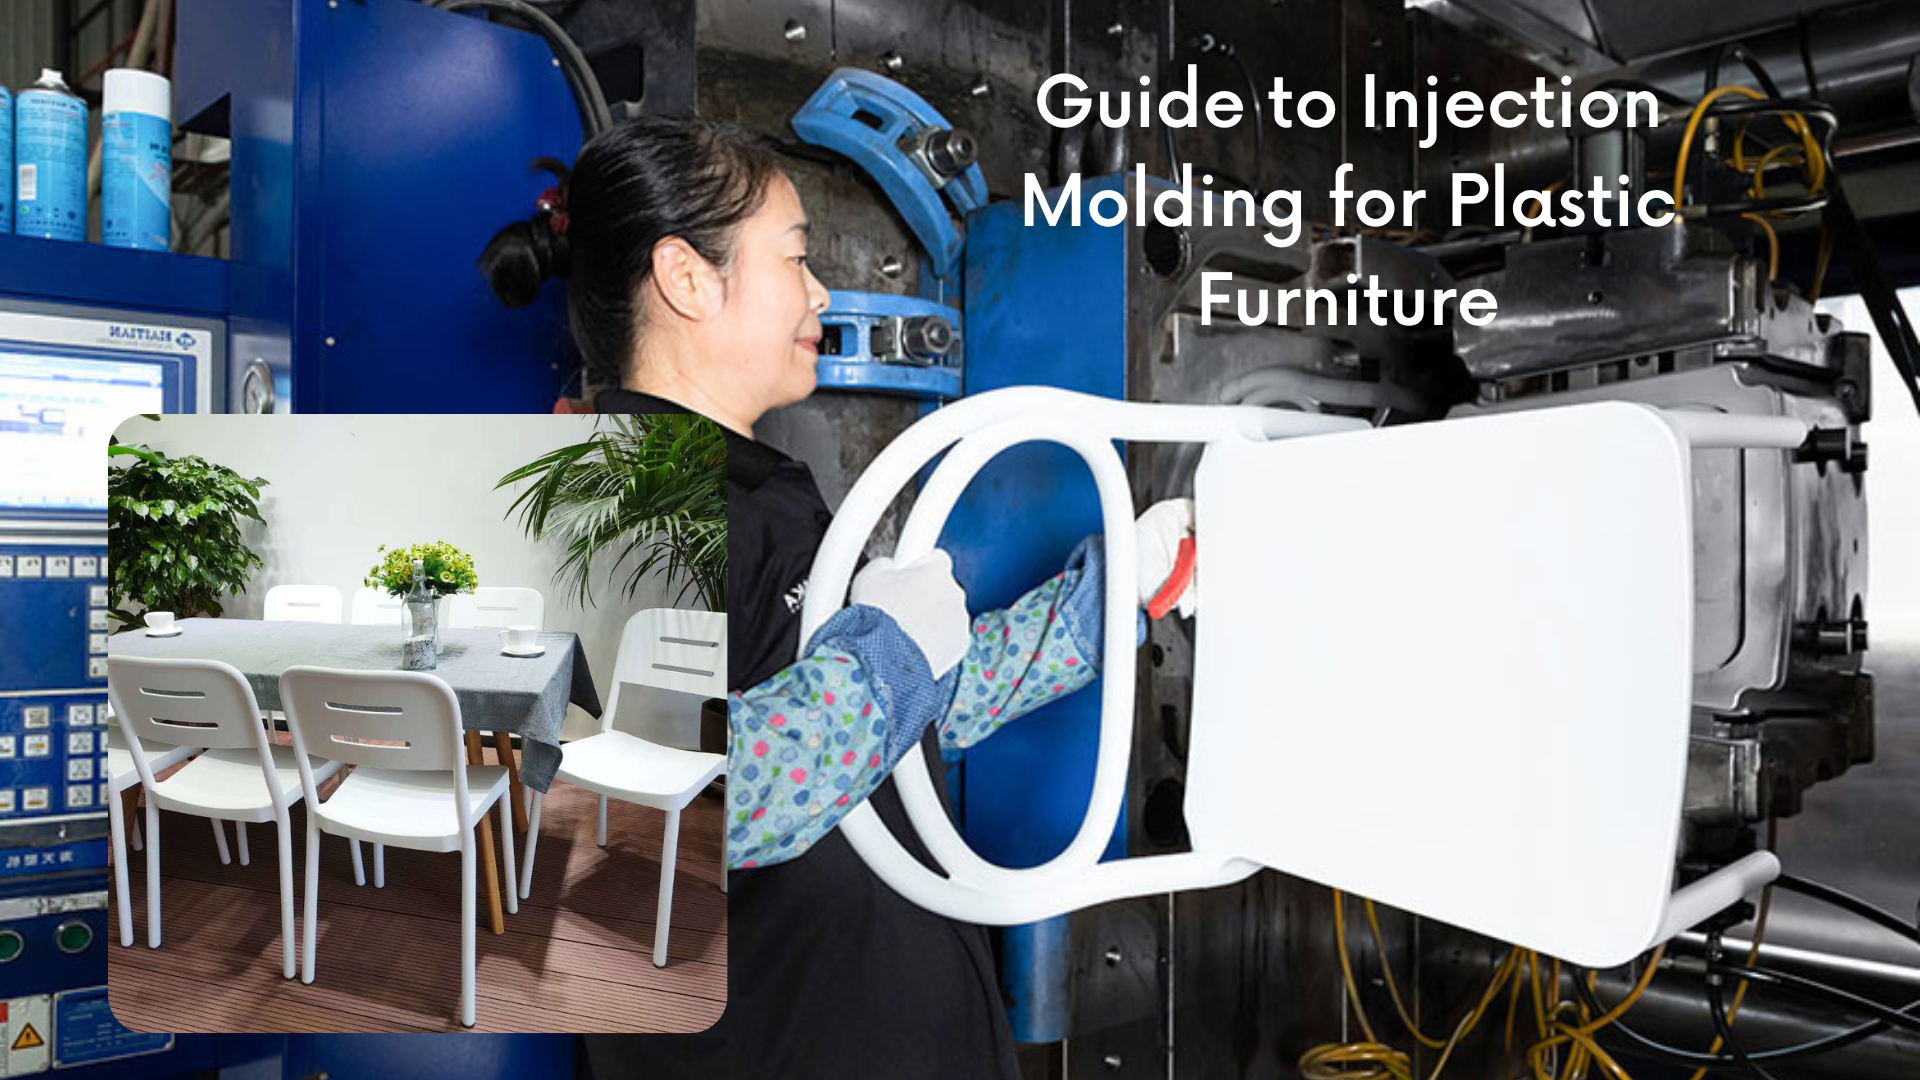 Guide to Injection Molding for Plastic Furniture